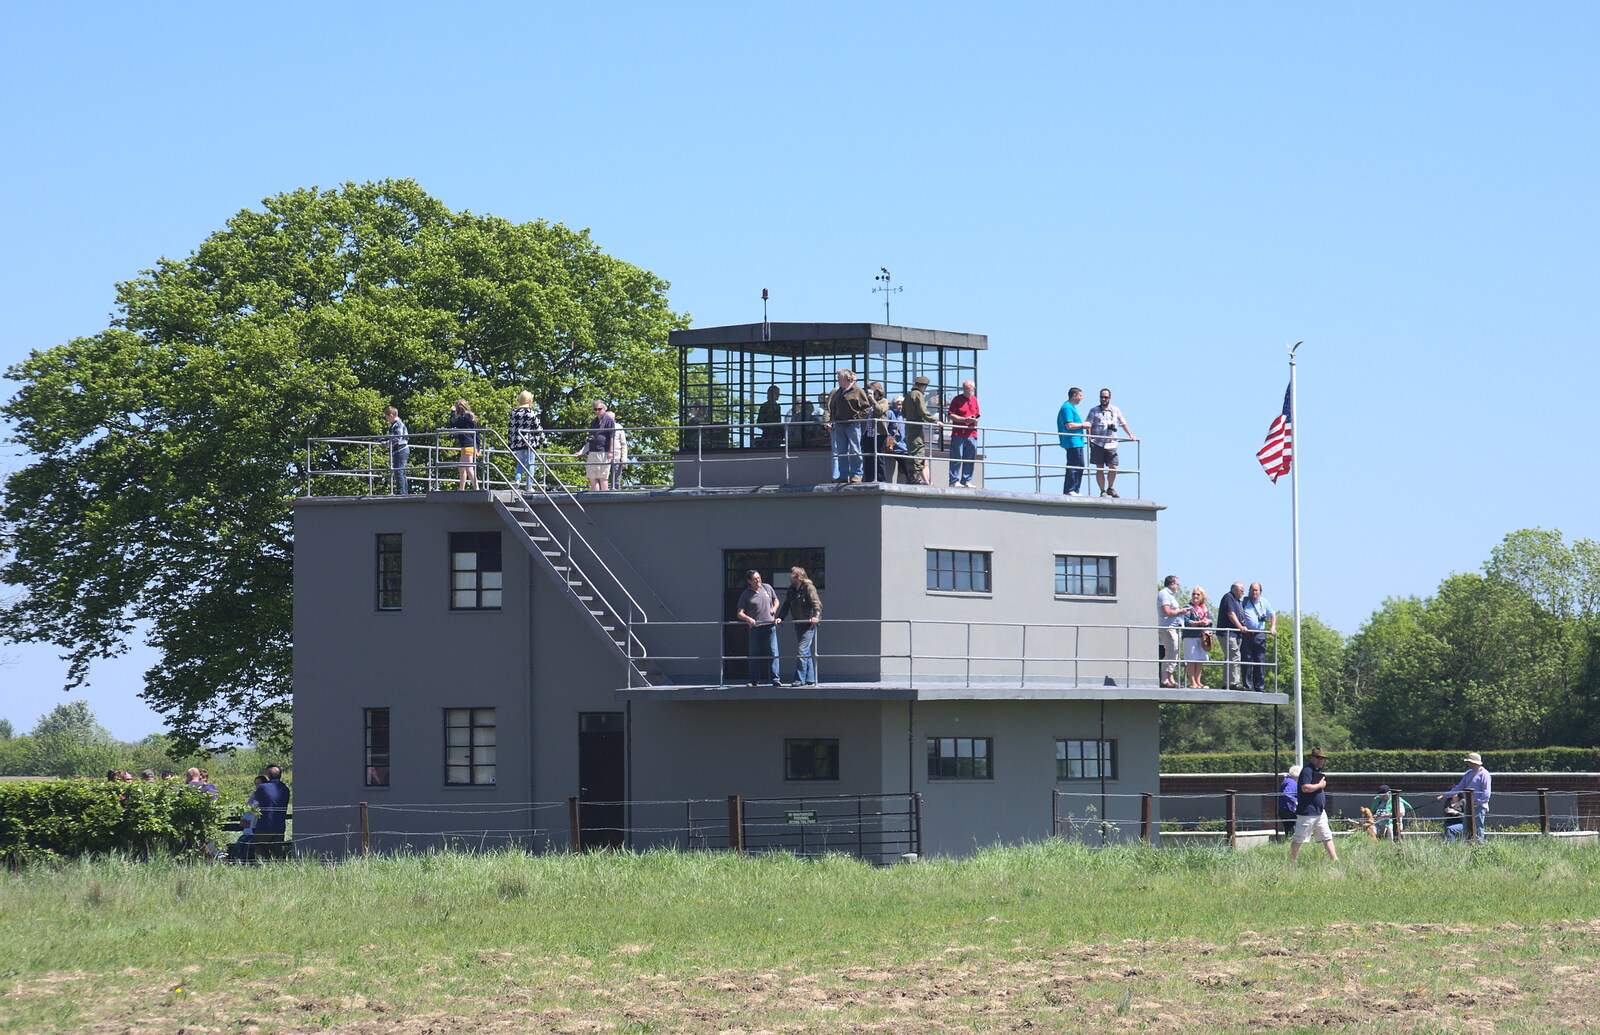 The Thorpe Abbots control tower, restored in 1977 from A "Sally B" B-17 Flypast, Thorpe Abbots, Norfolk - 27th May 2013